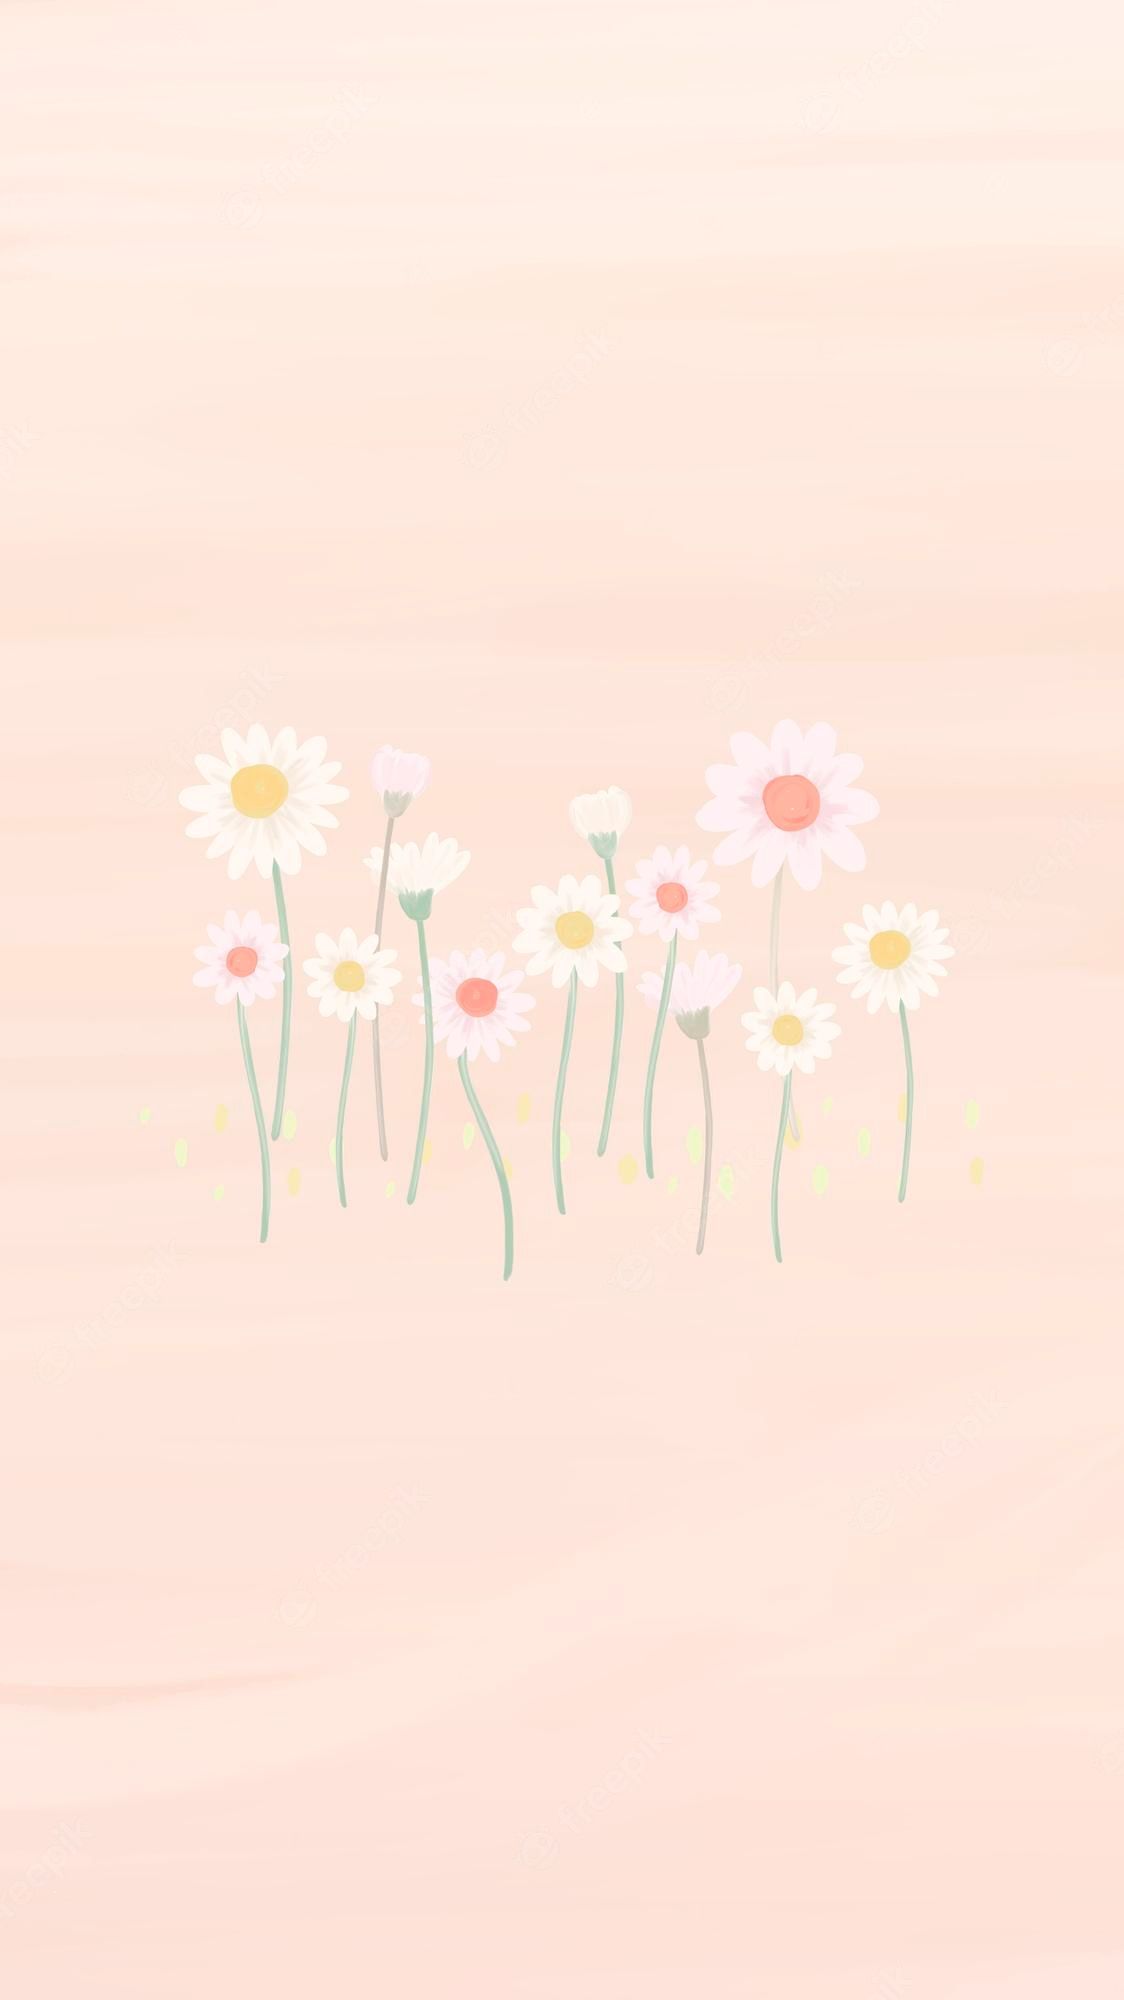 IPhone wallpaper of a line of daisies on a pink background - Cute, pastel, couple, hand drawn, daisy, doodles